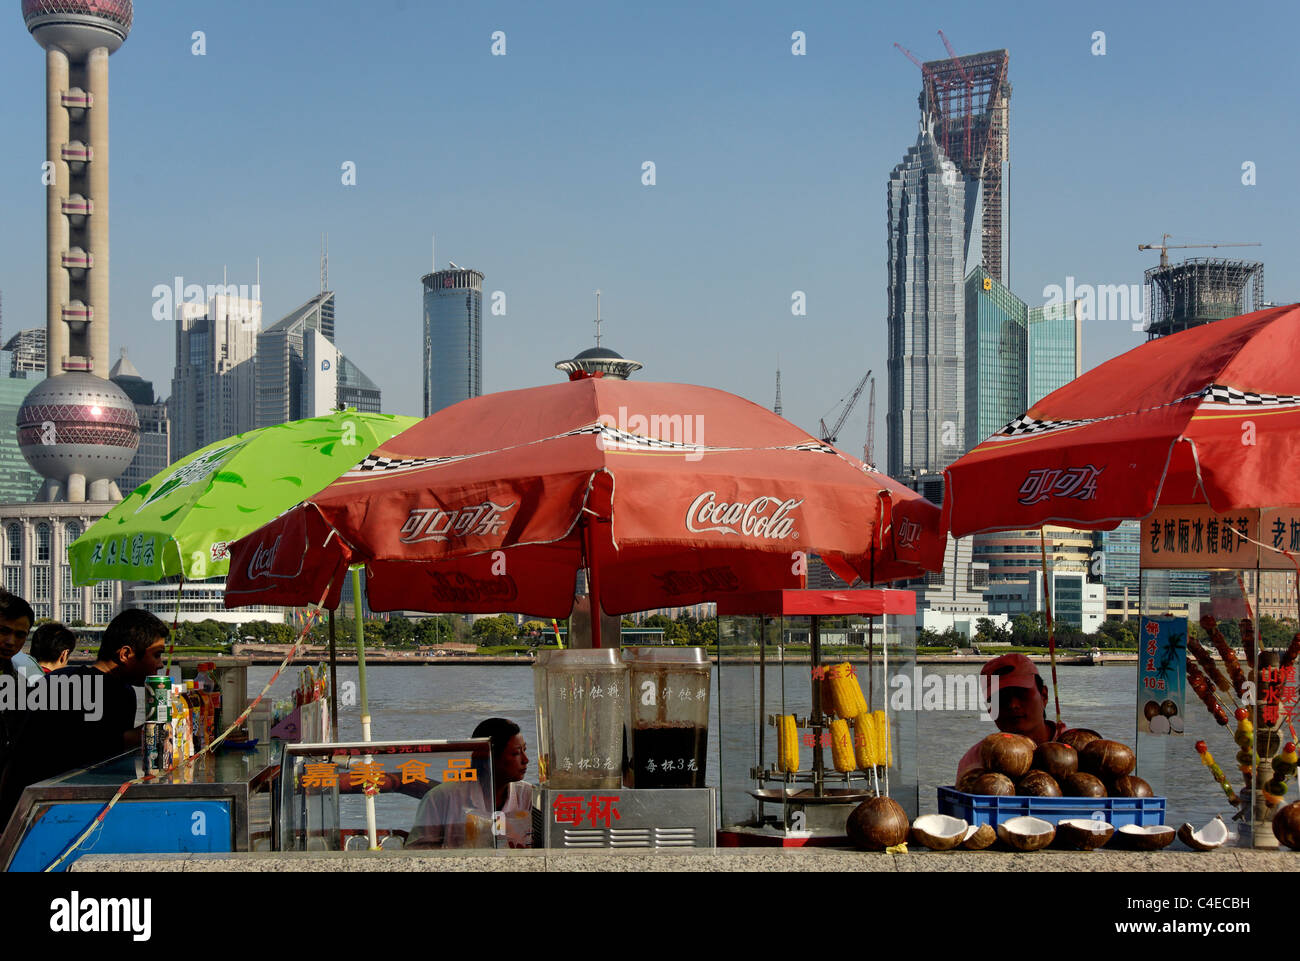 People on the Bund, overlooking the Huangpu River and the Pudong skyline, Shanghai, China. Stock Photo